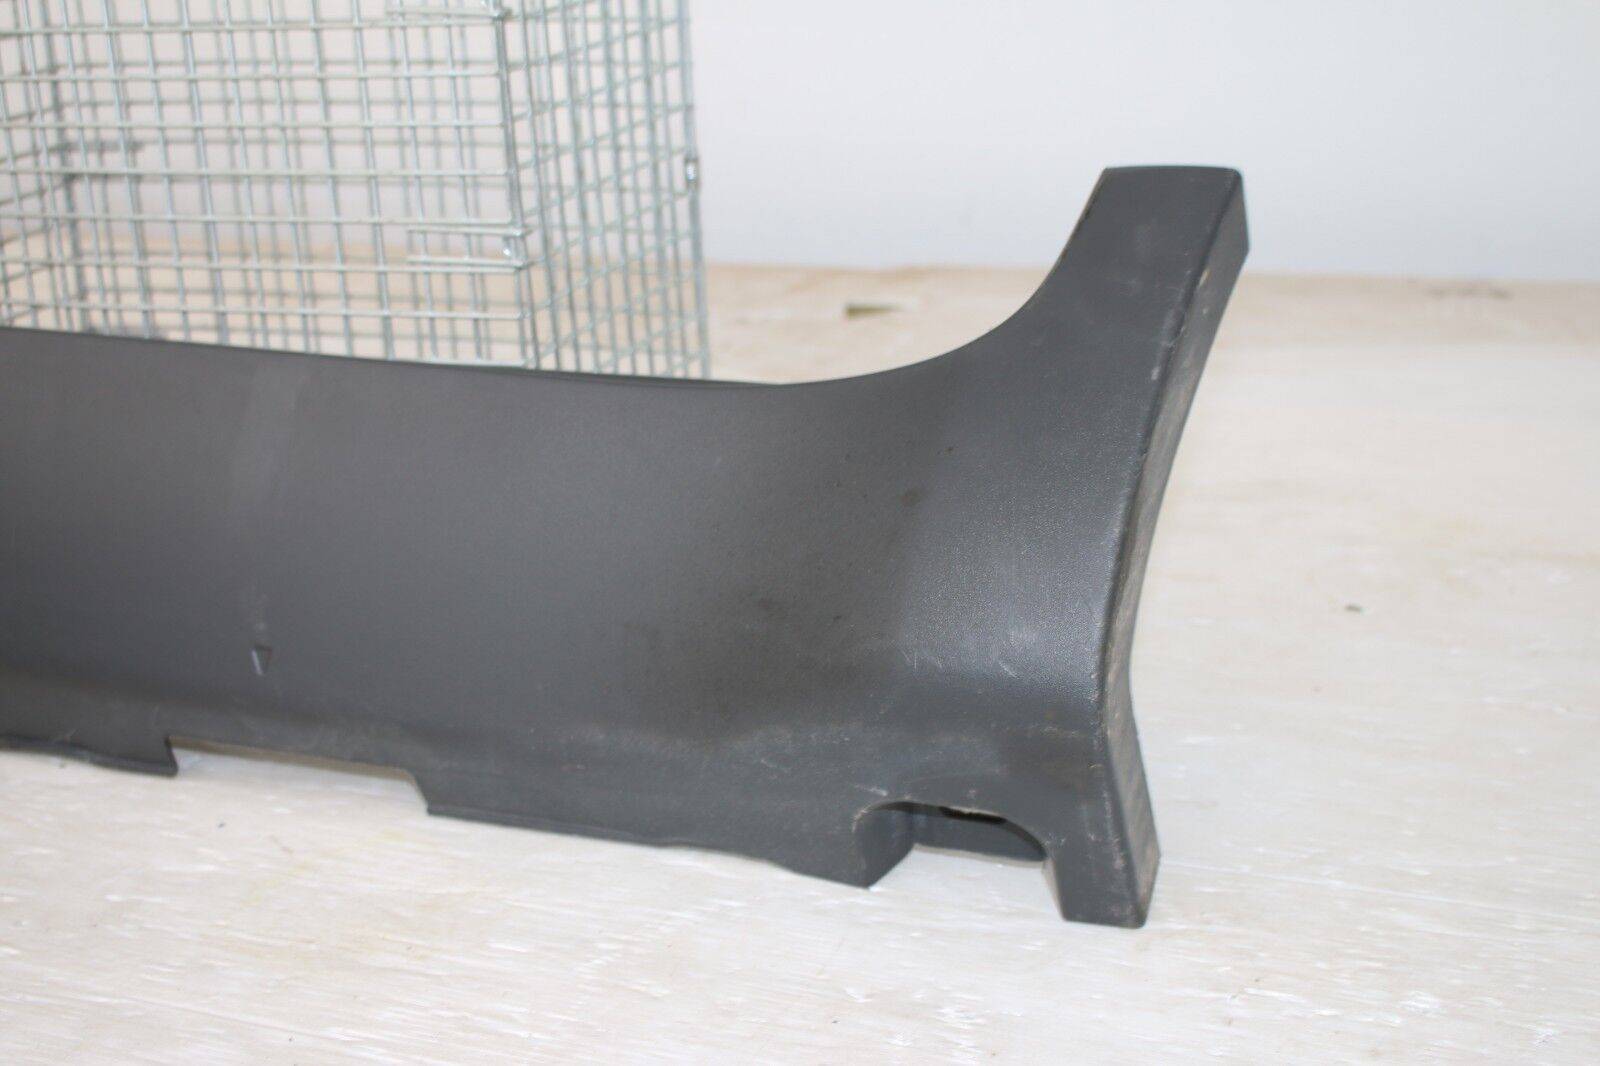 FORD-KUGA-LEFT-SIDE-SILL-SKIRT-COVER-2008-TO-2012-175367545084-2